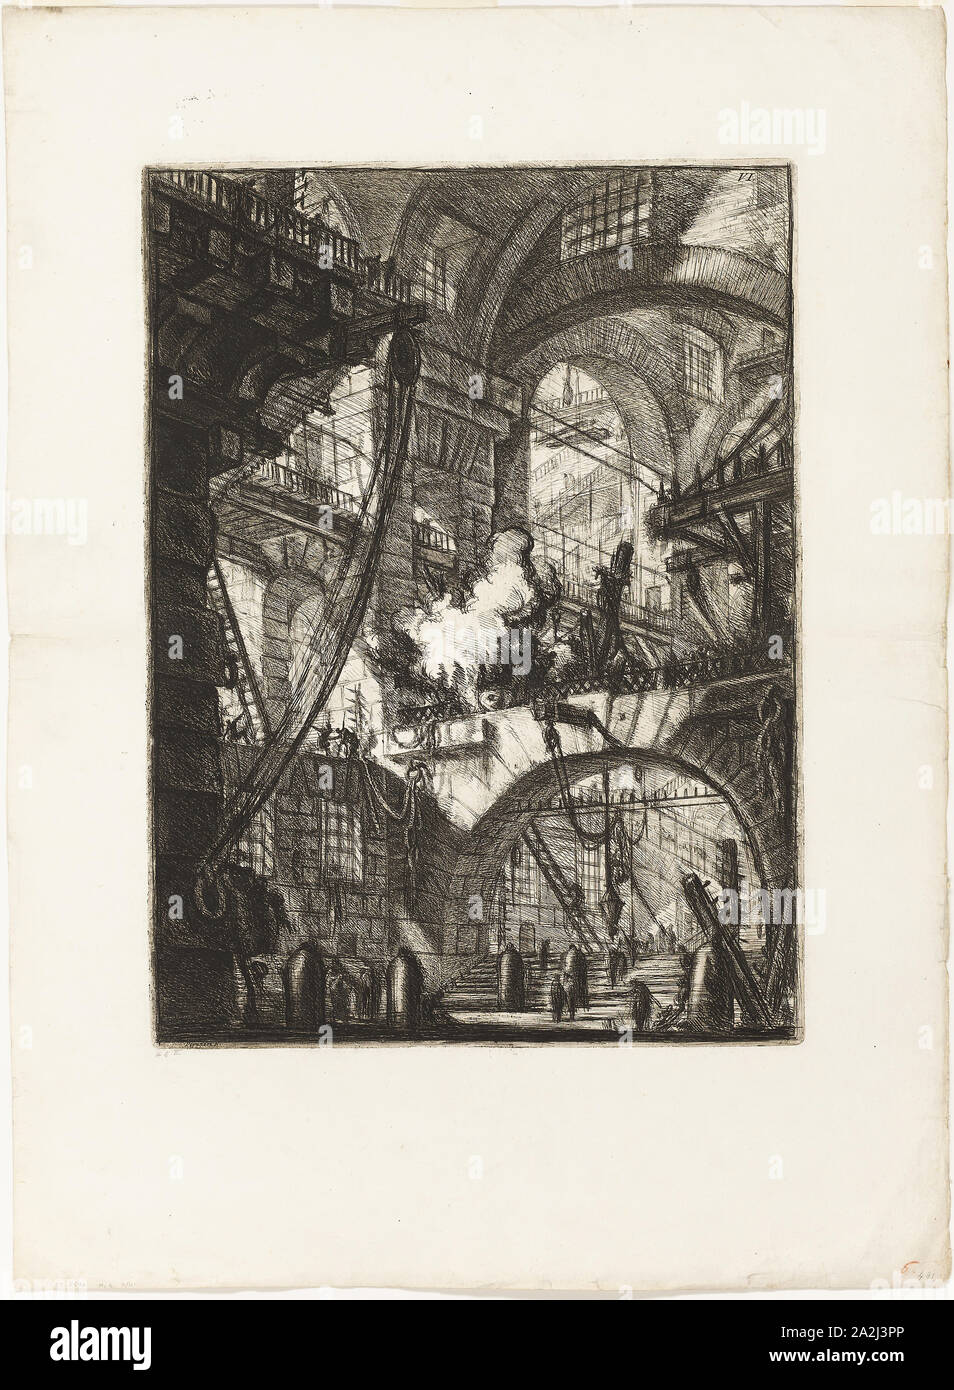 The Smoking Fire, plate 6 from Imaginary Prisons, 1761, Giovanni Battista Piranesi, Italian, 1720-1778, Italy, Etching and engraving on heavy ivory laid paper, 537 x 394 mm (image), 544 x 401 mm (plate), 787 x 577 mm (sheet Stock Photo